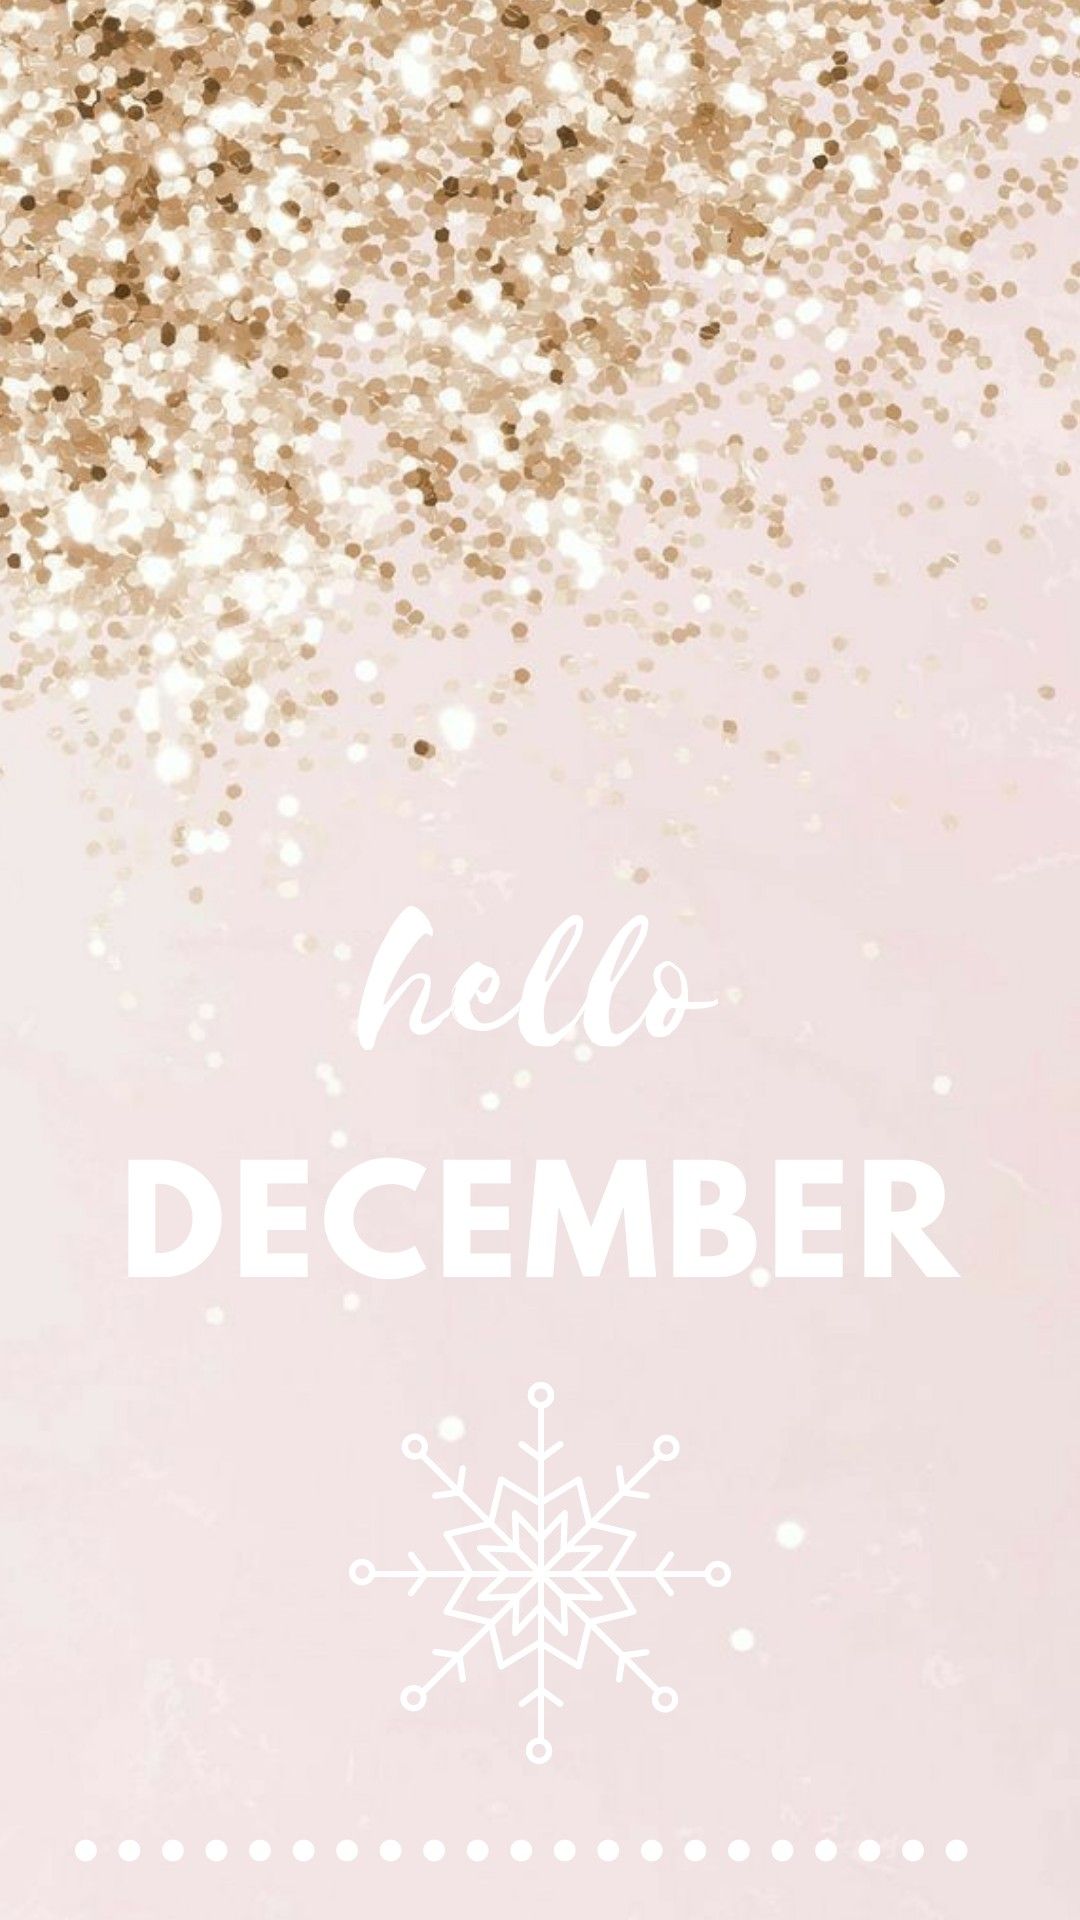 The text hello december with gold glitter - December